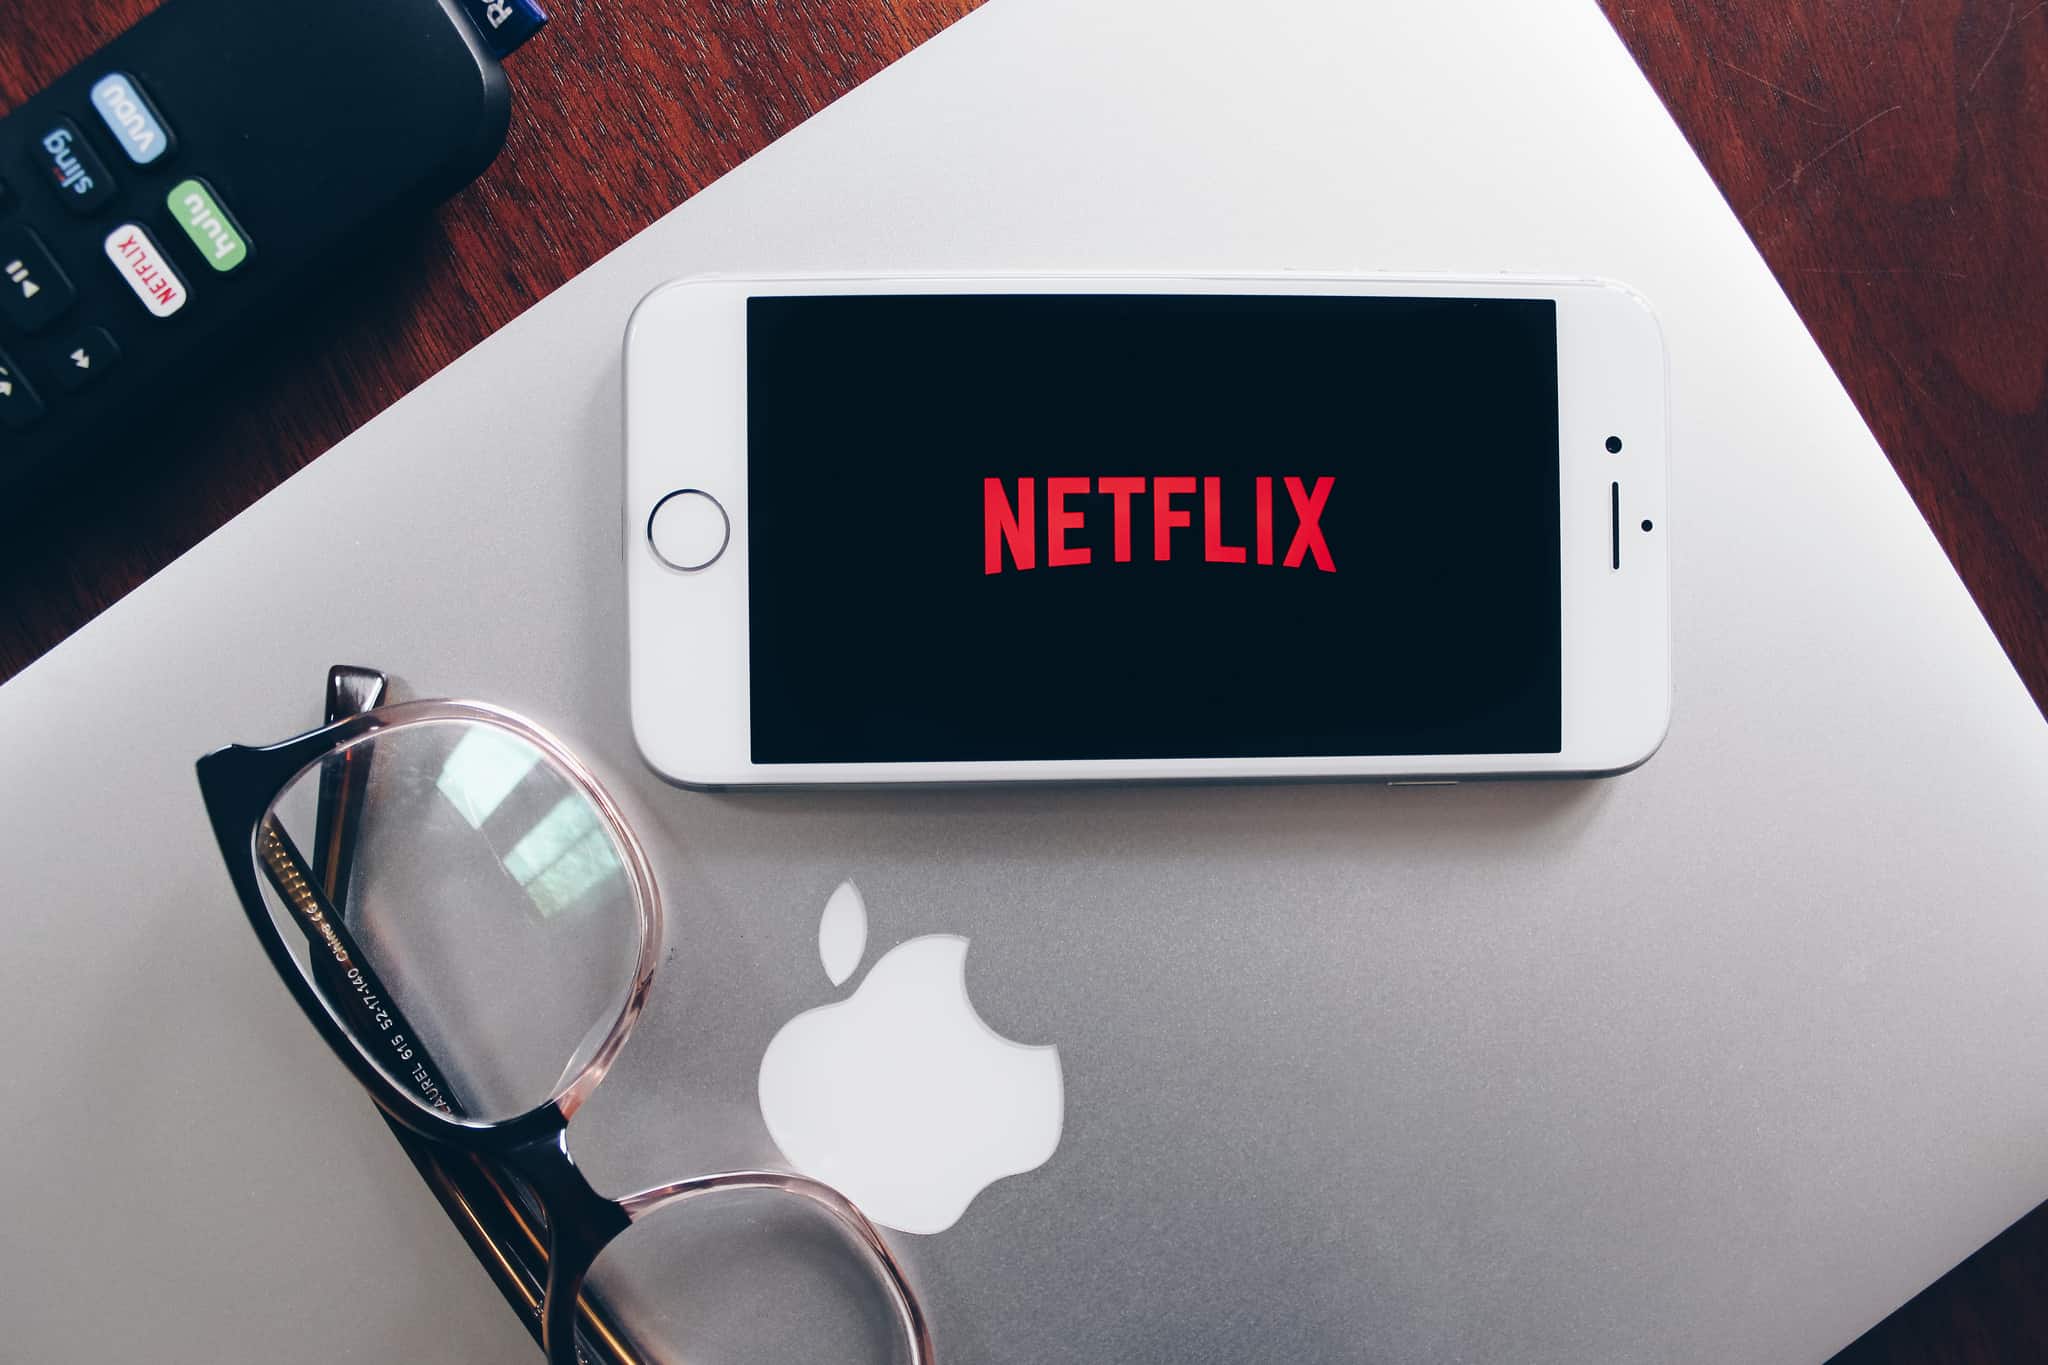 75% of Netflix users have no plans to jump ship to Apple TV+ (right away)